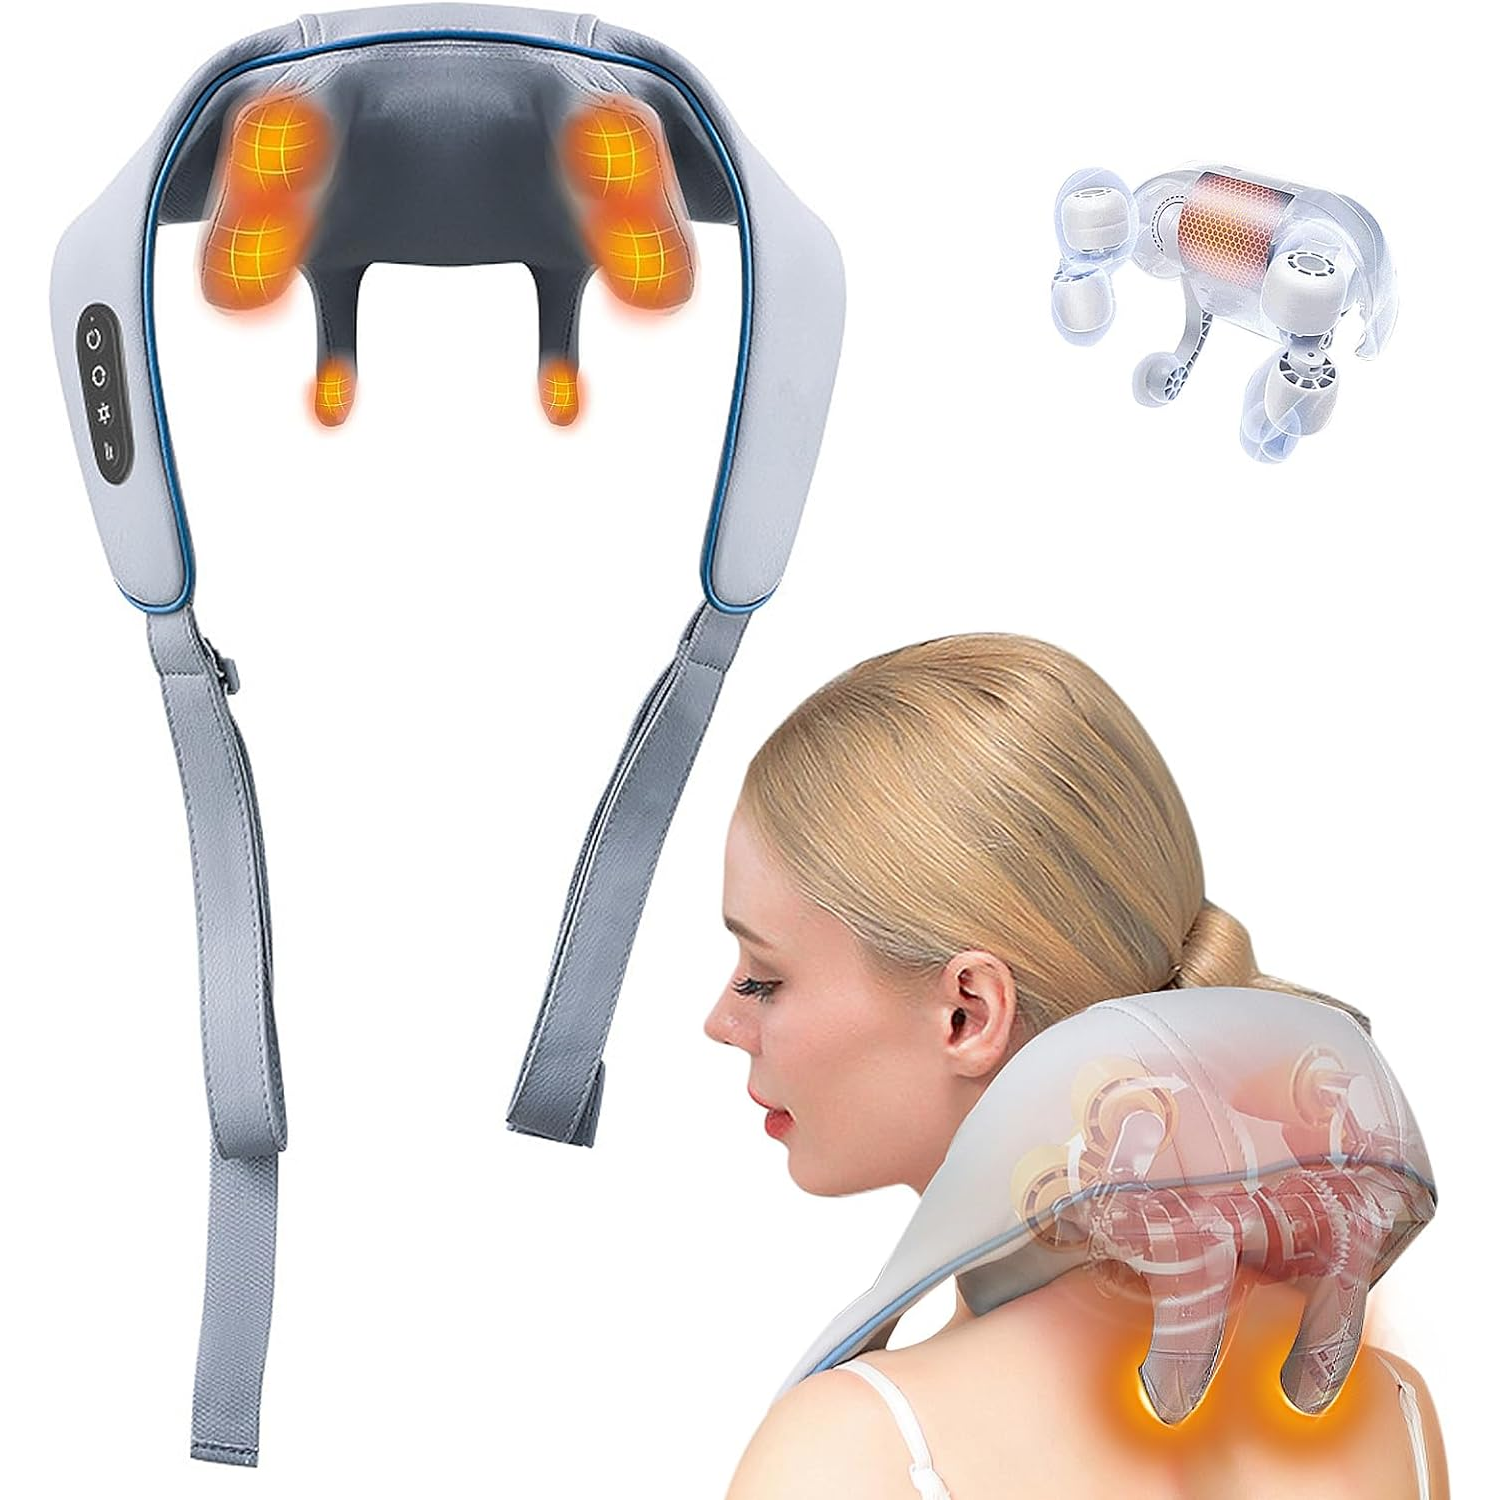 New Intelligent Electric Neck Massager With Heat Function & Pulse Massage  For Home Use, Shoulder Neck Pain Relief